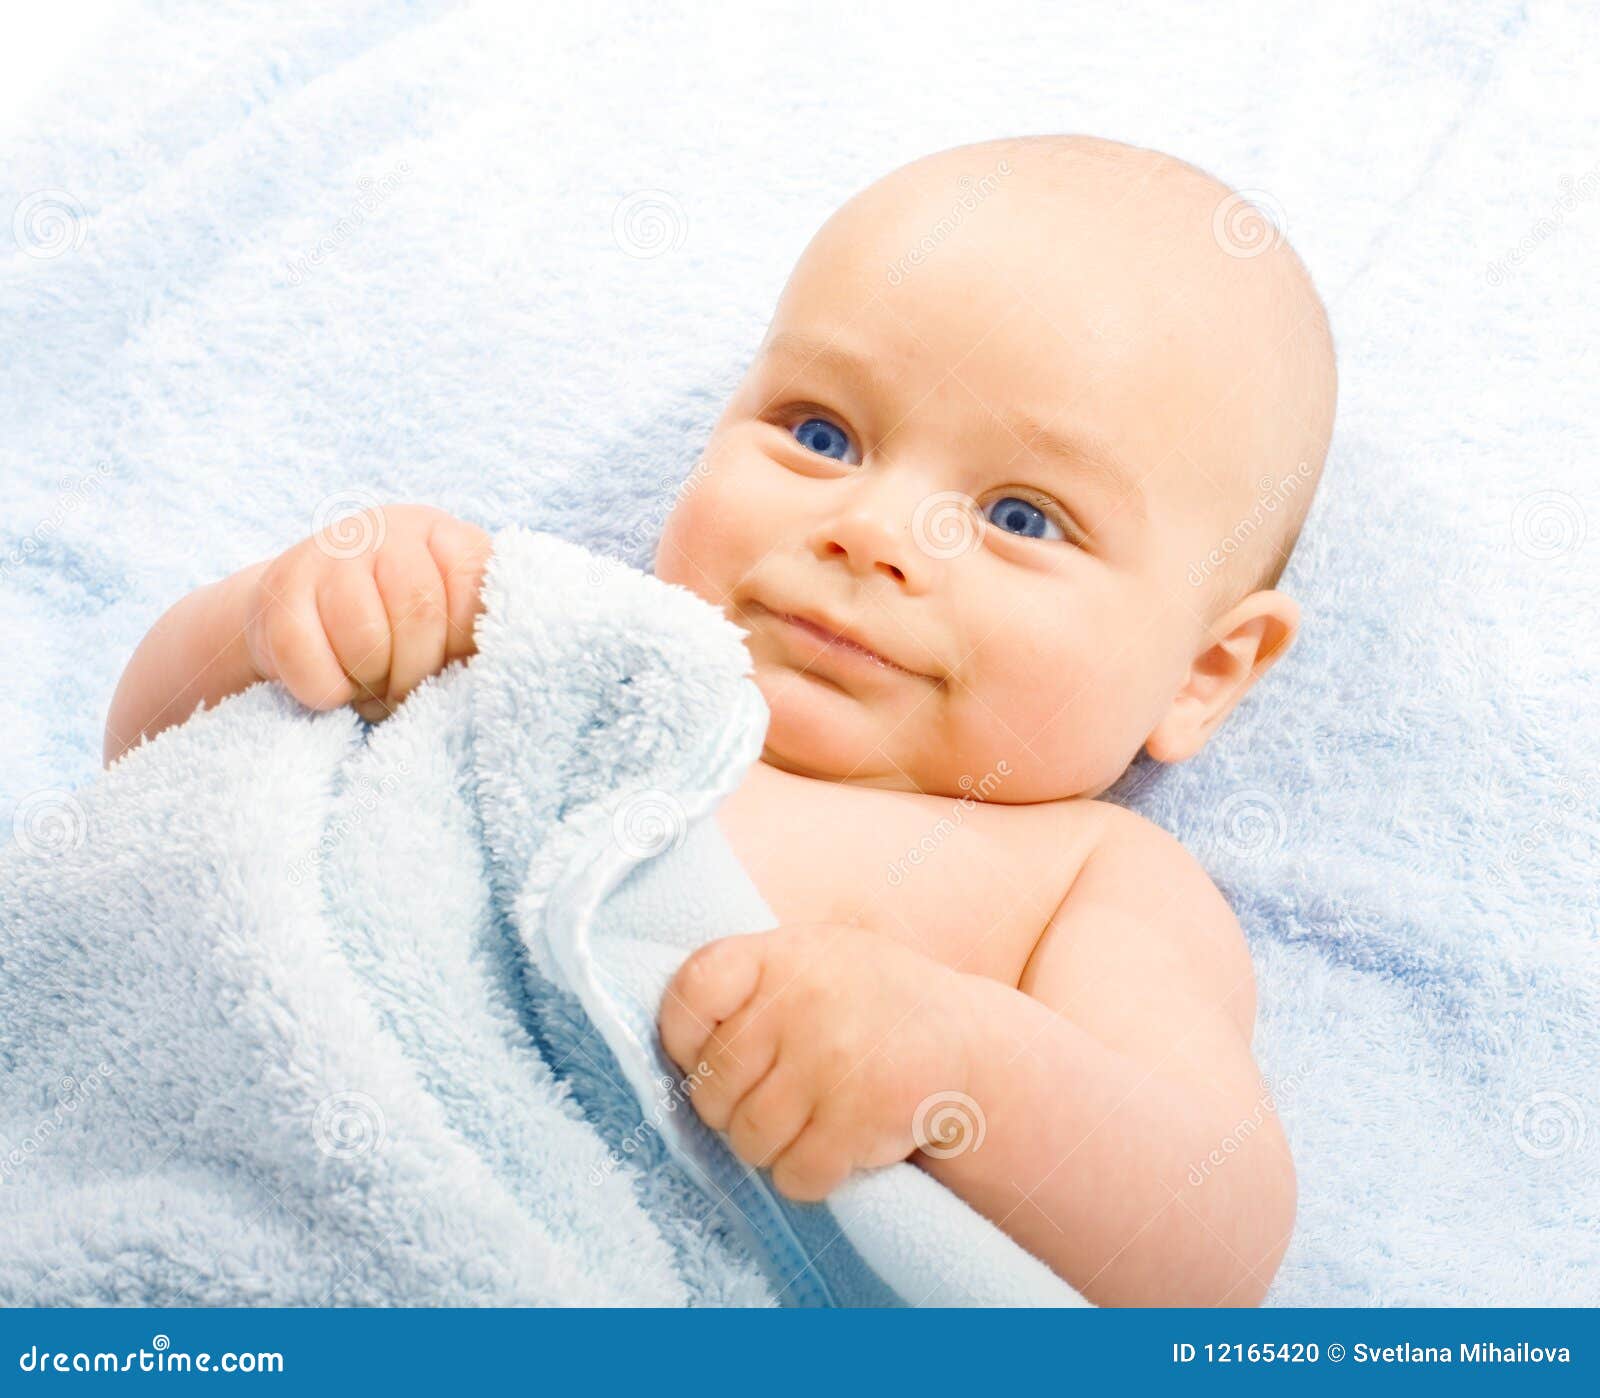 Cheerful baby stock photo. Image of looking, jolly, child - 12165420